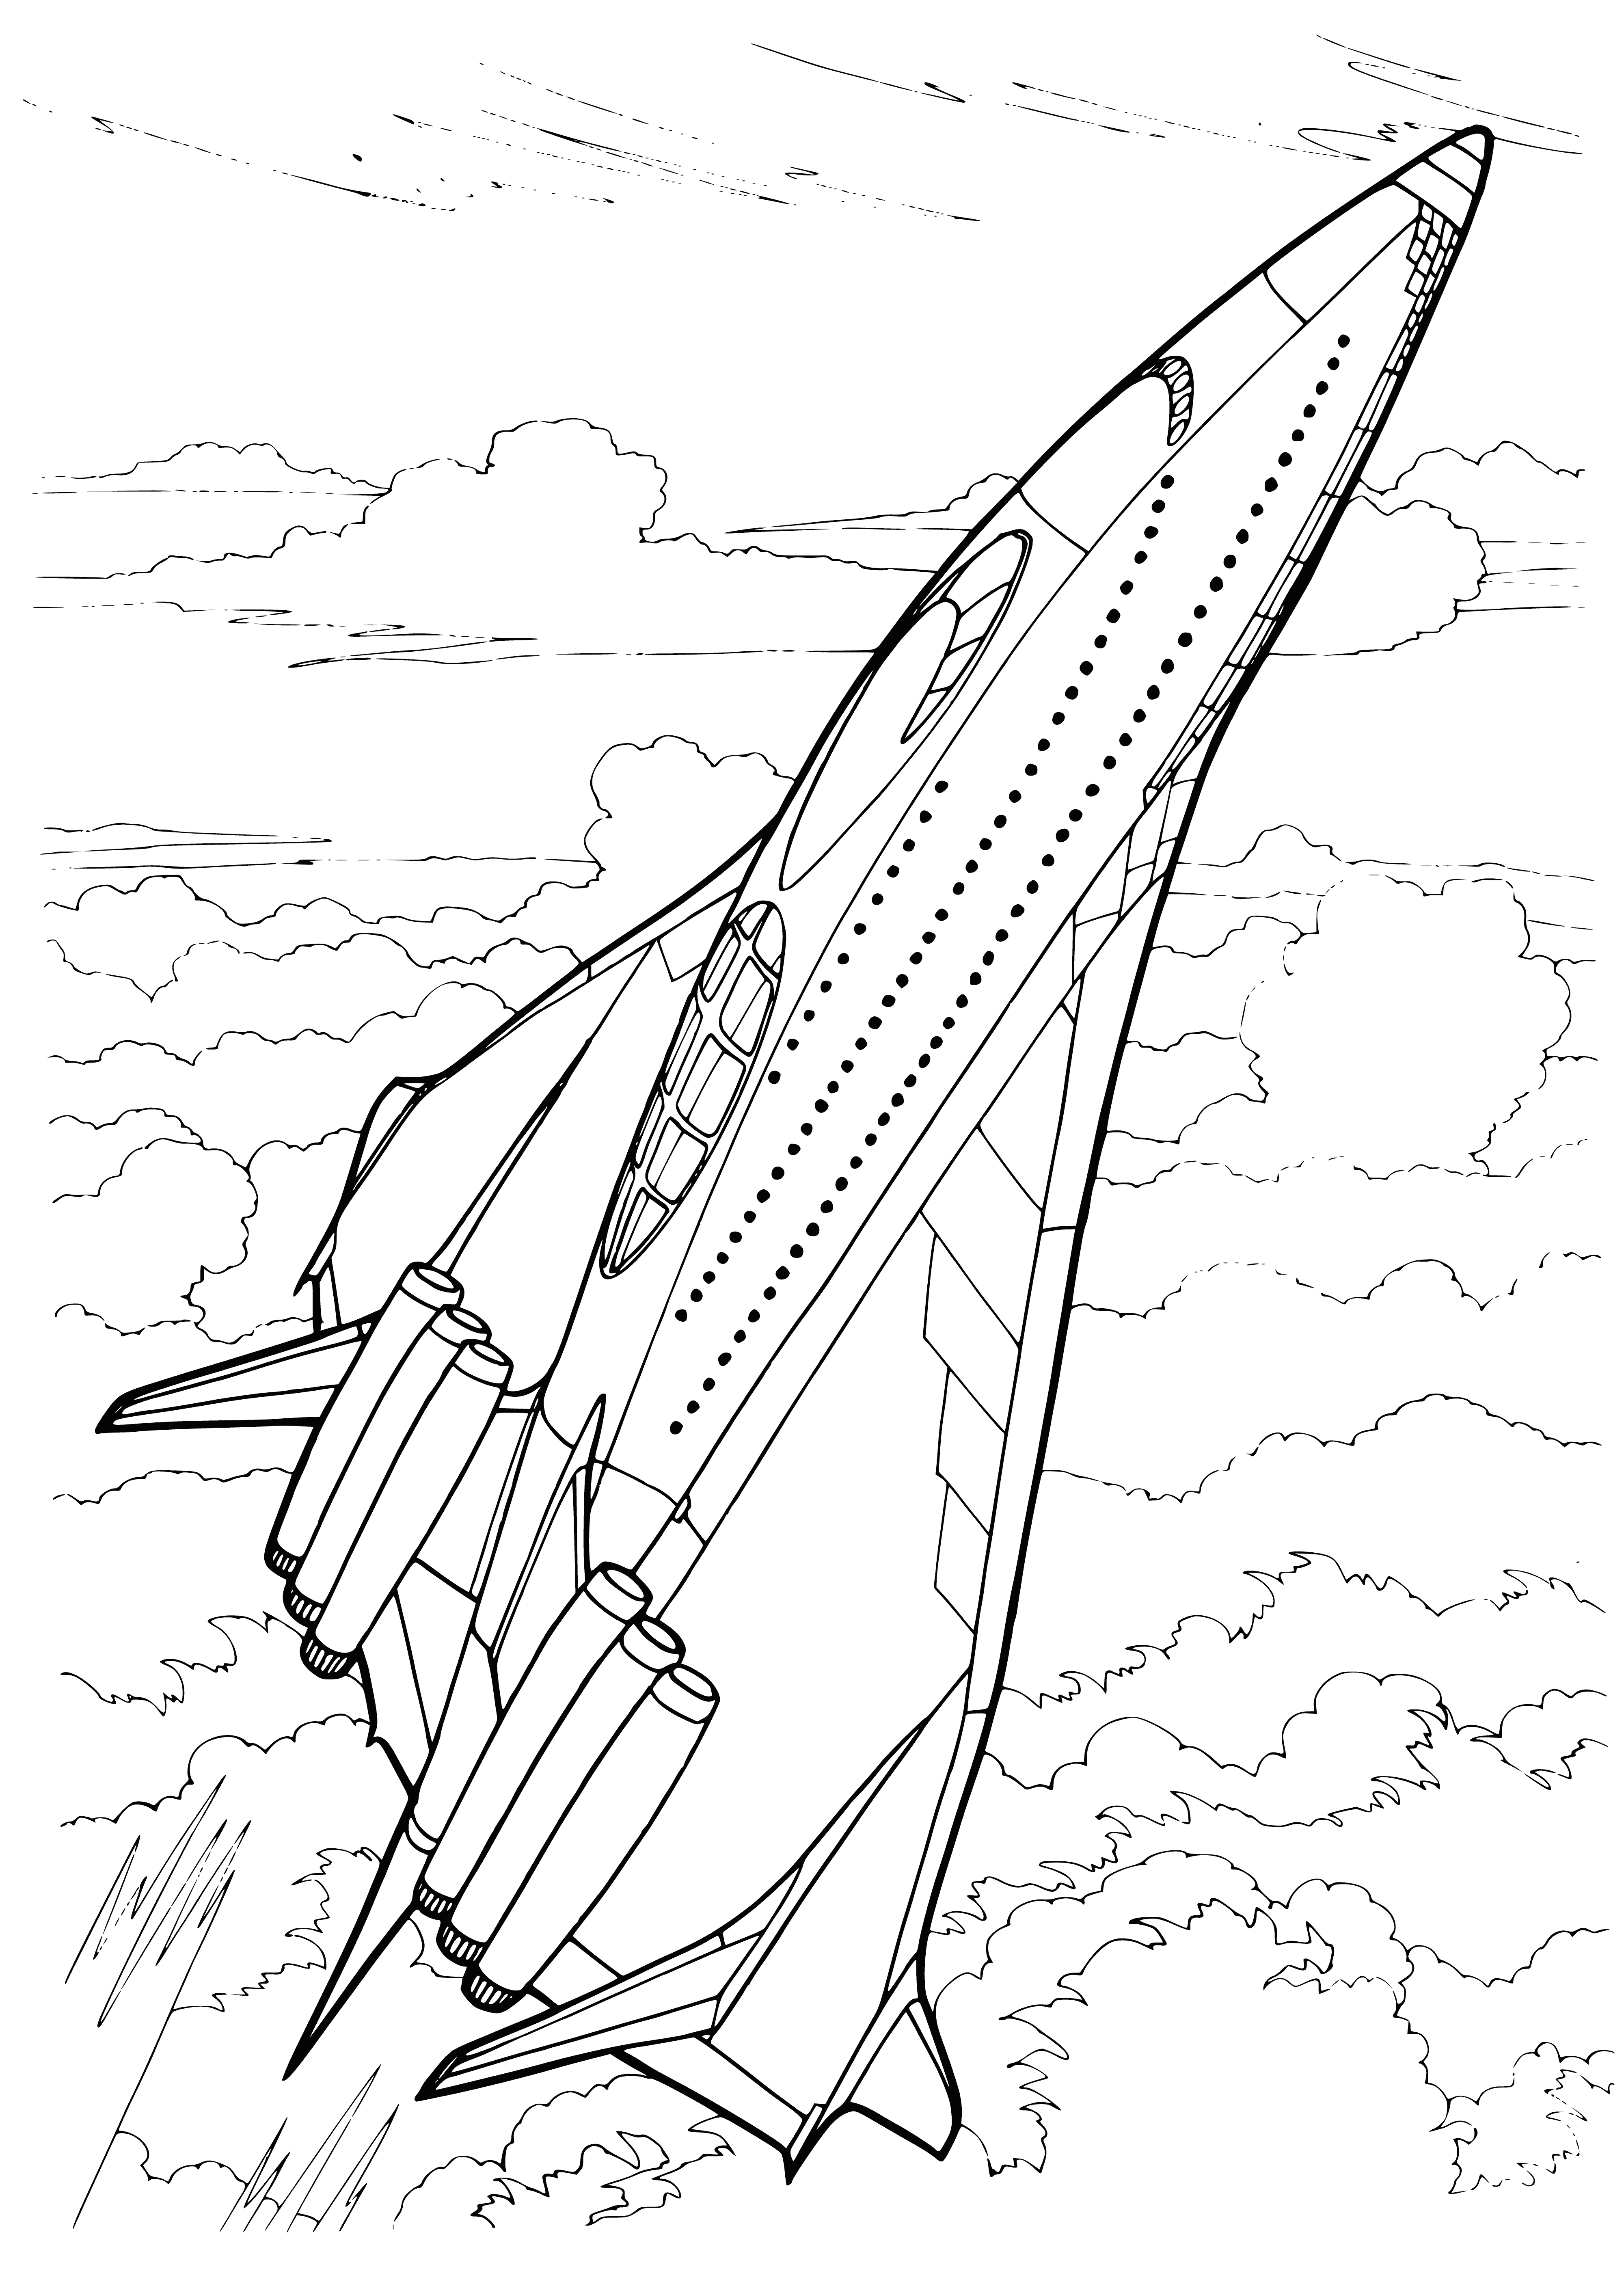 coloring page: At space port, large, sleek liner waits; passengers board, and luggage loaded. Ship brightly lit, air thrumming with anticipation.